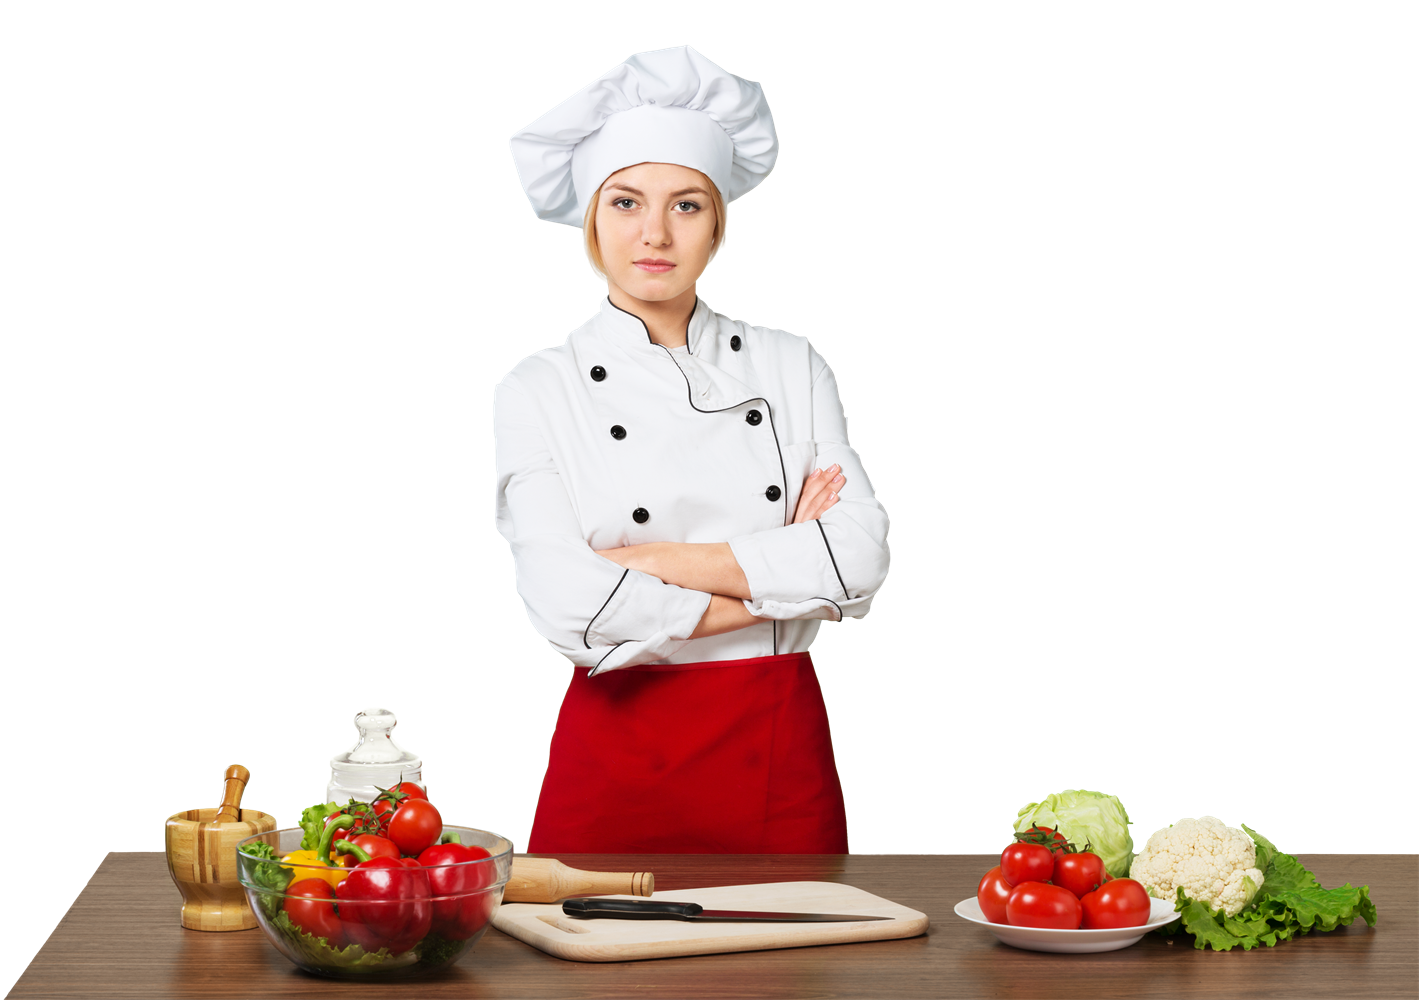 cook clipart female chef